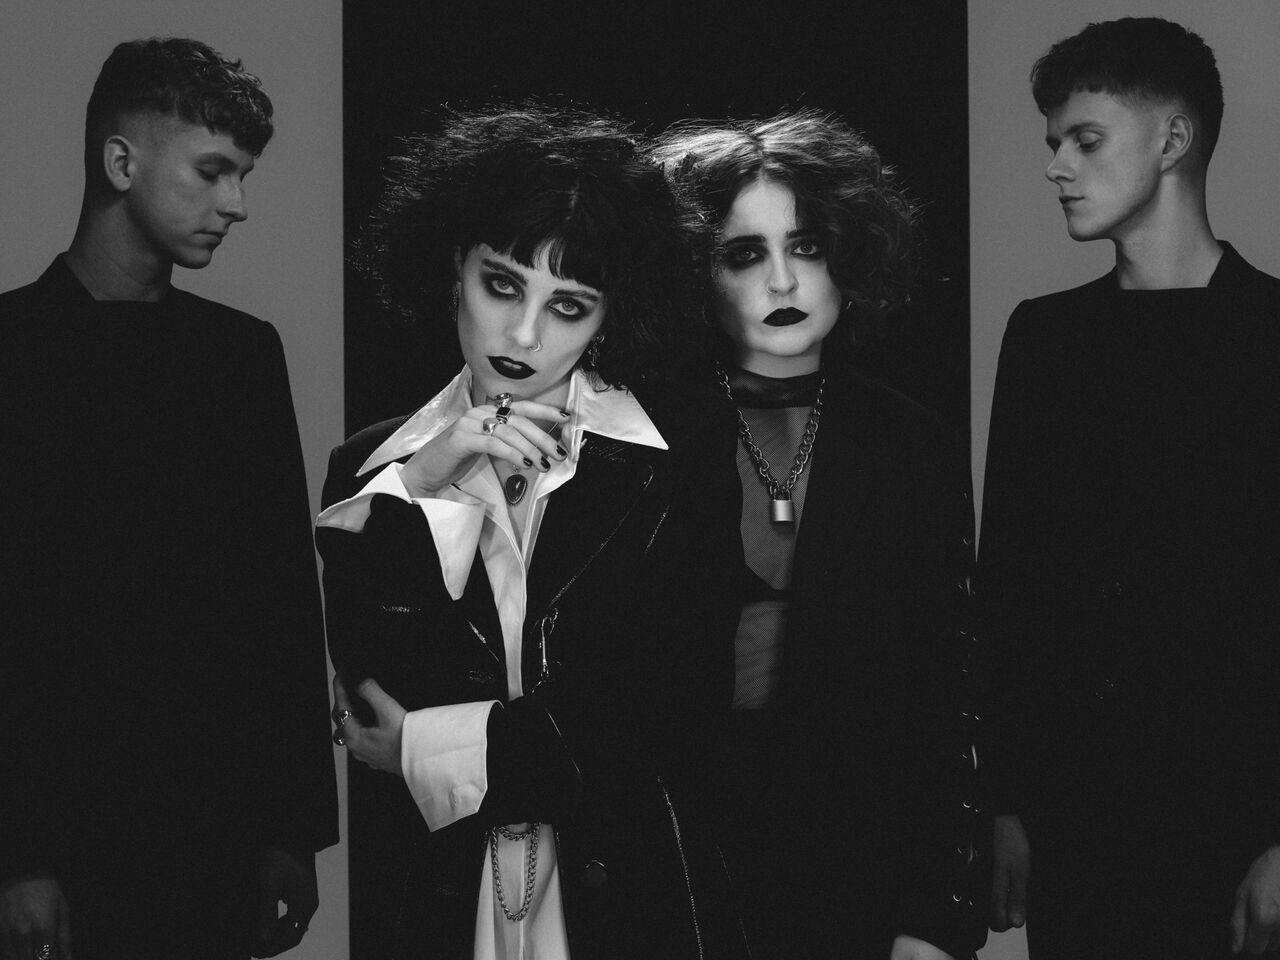 REVIEW: Pale Waves make lasting first impression with ‘My Mind Makes Noises’